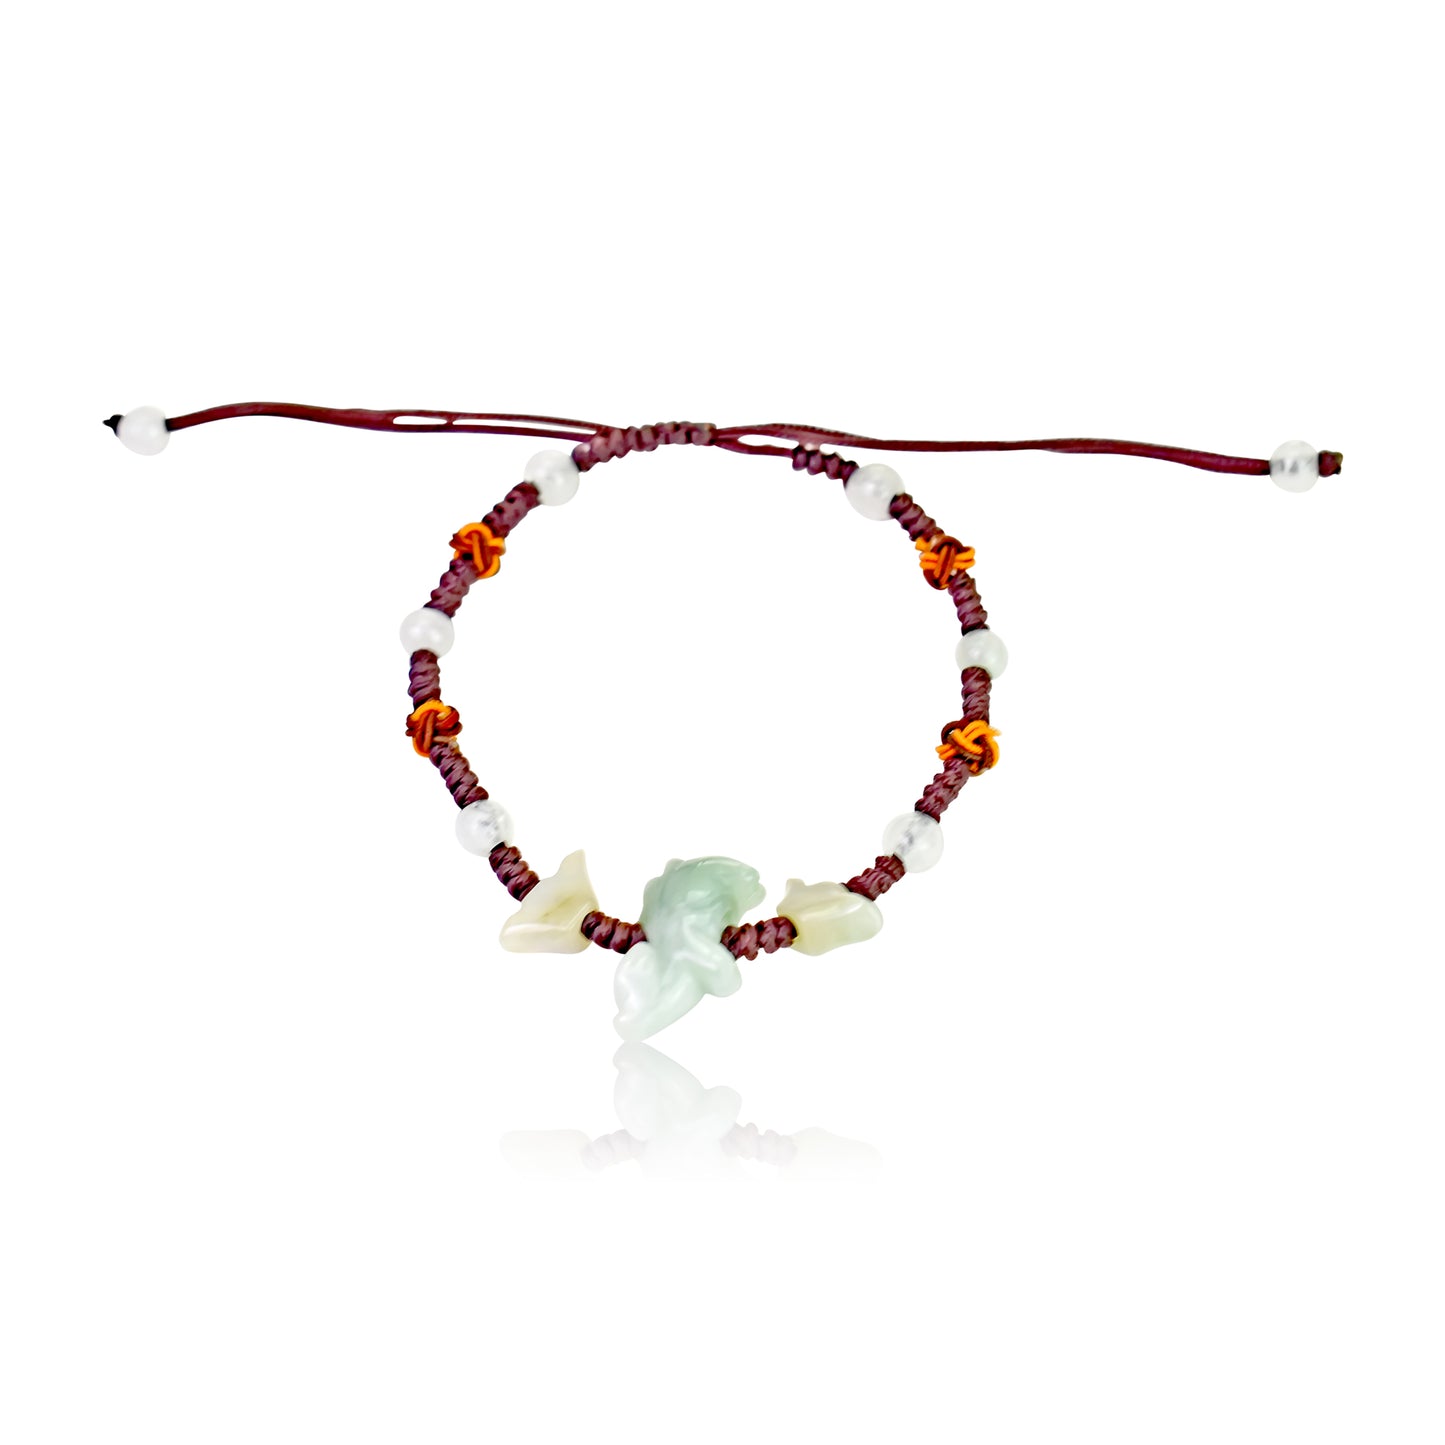 A Unique Gift: Ox Chinese Zodiac Handmade Jade Bracelet made with Green Cord